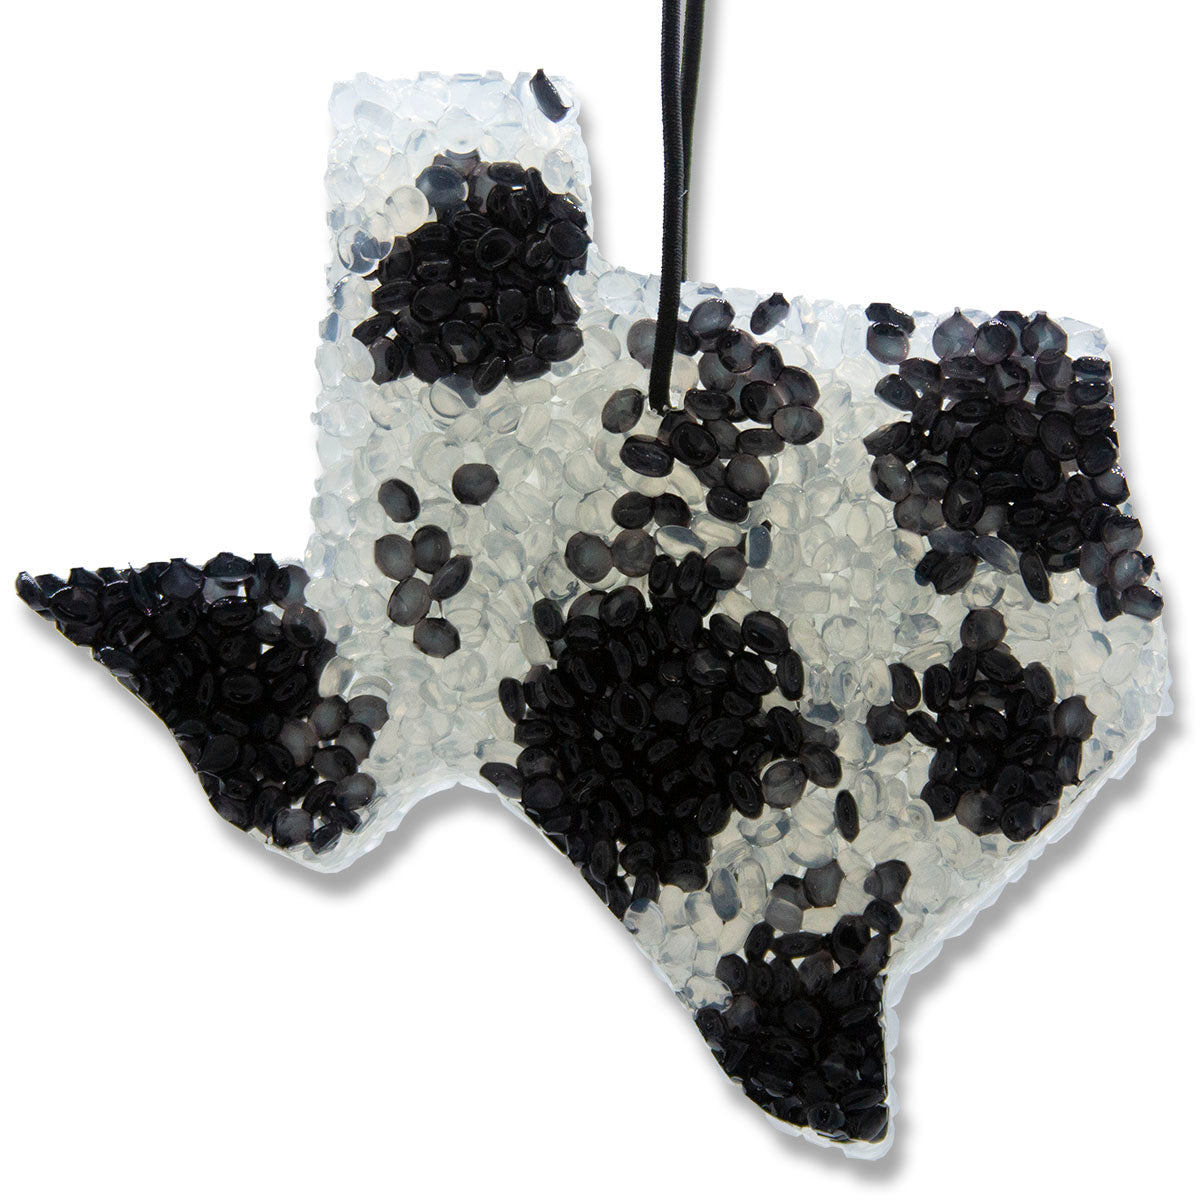 Leather, Lone Star Candles & More’s Premium Strongly Scented Freshies, Authentic Aroma of Genuine Leather, Car & Air Freshener, USA Made in Texas, Black TX Cowhide 1-Pack